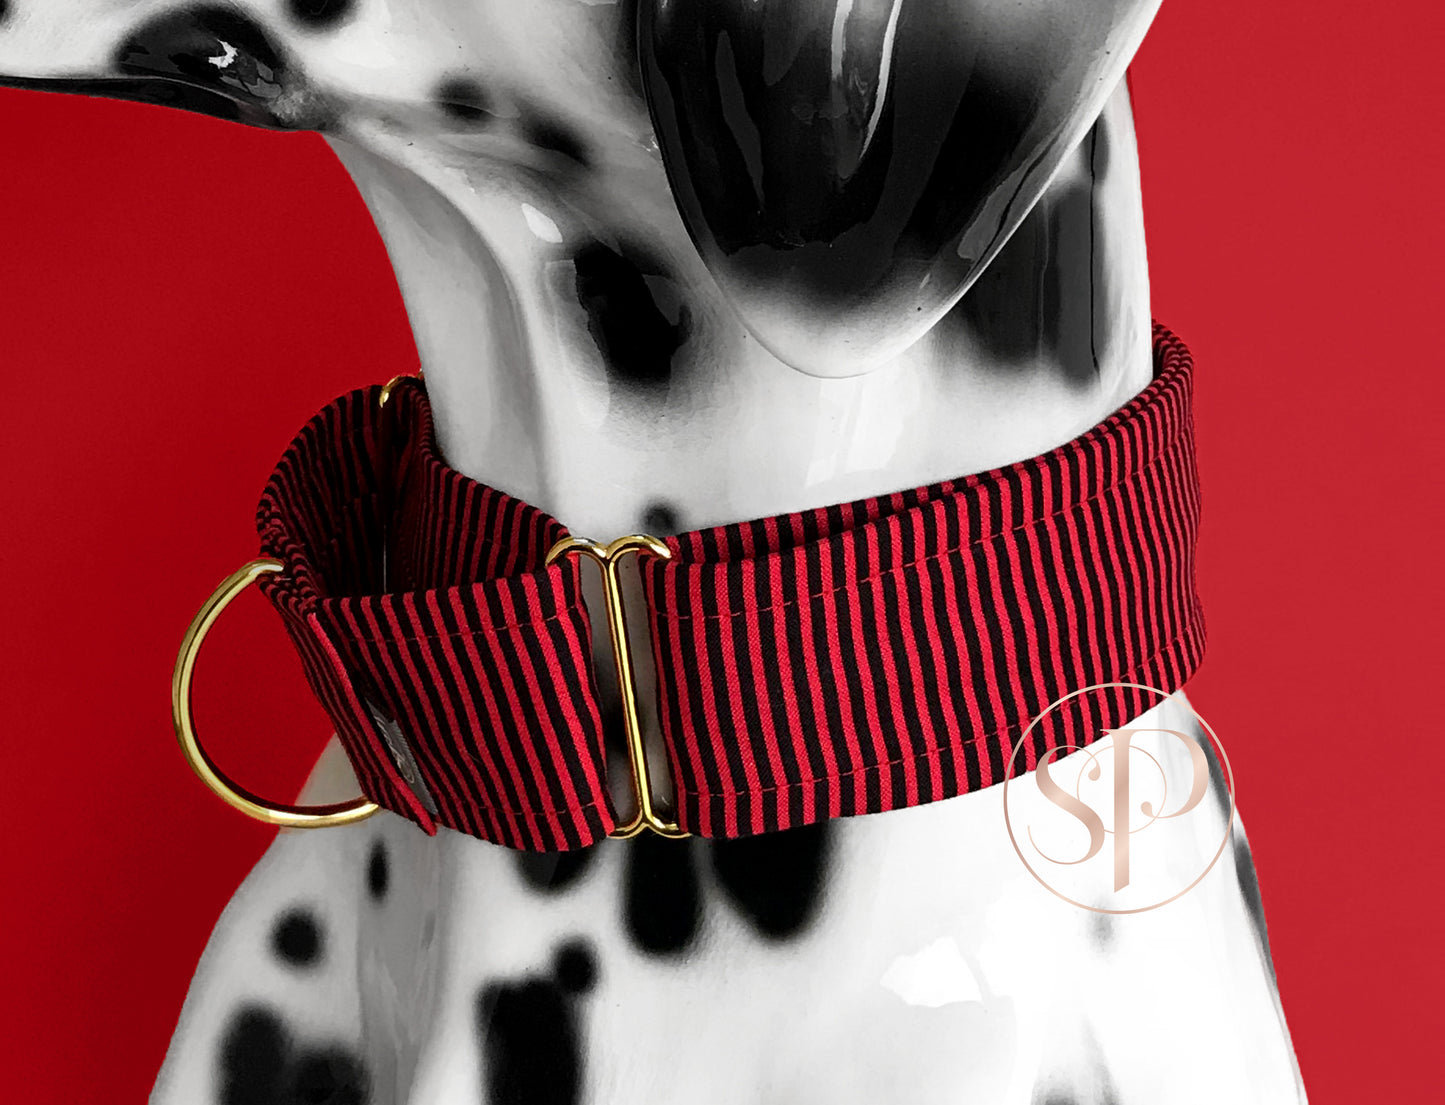 A Pirates Life For Me Martingale Dog Collar in Red Stripes